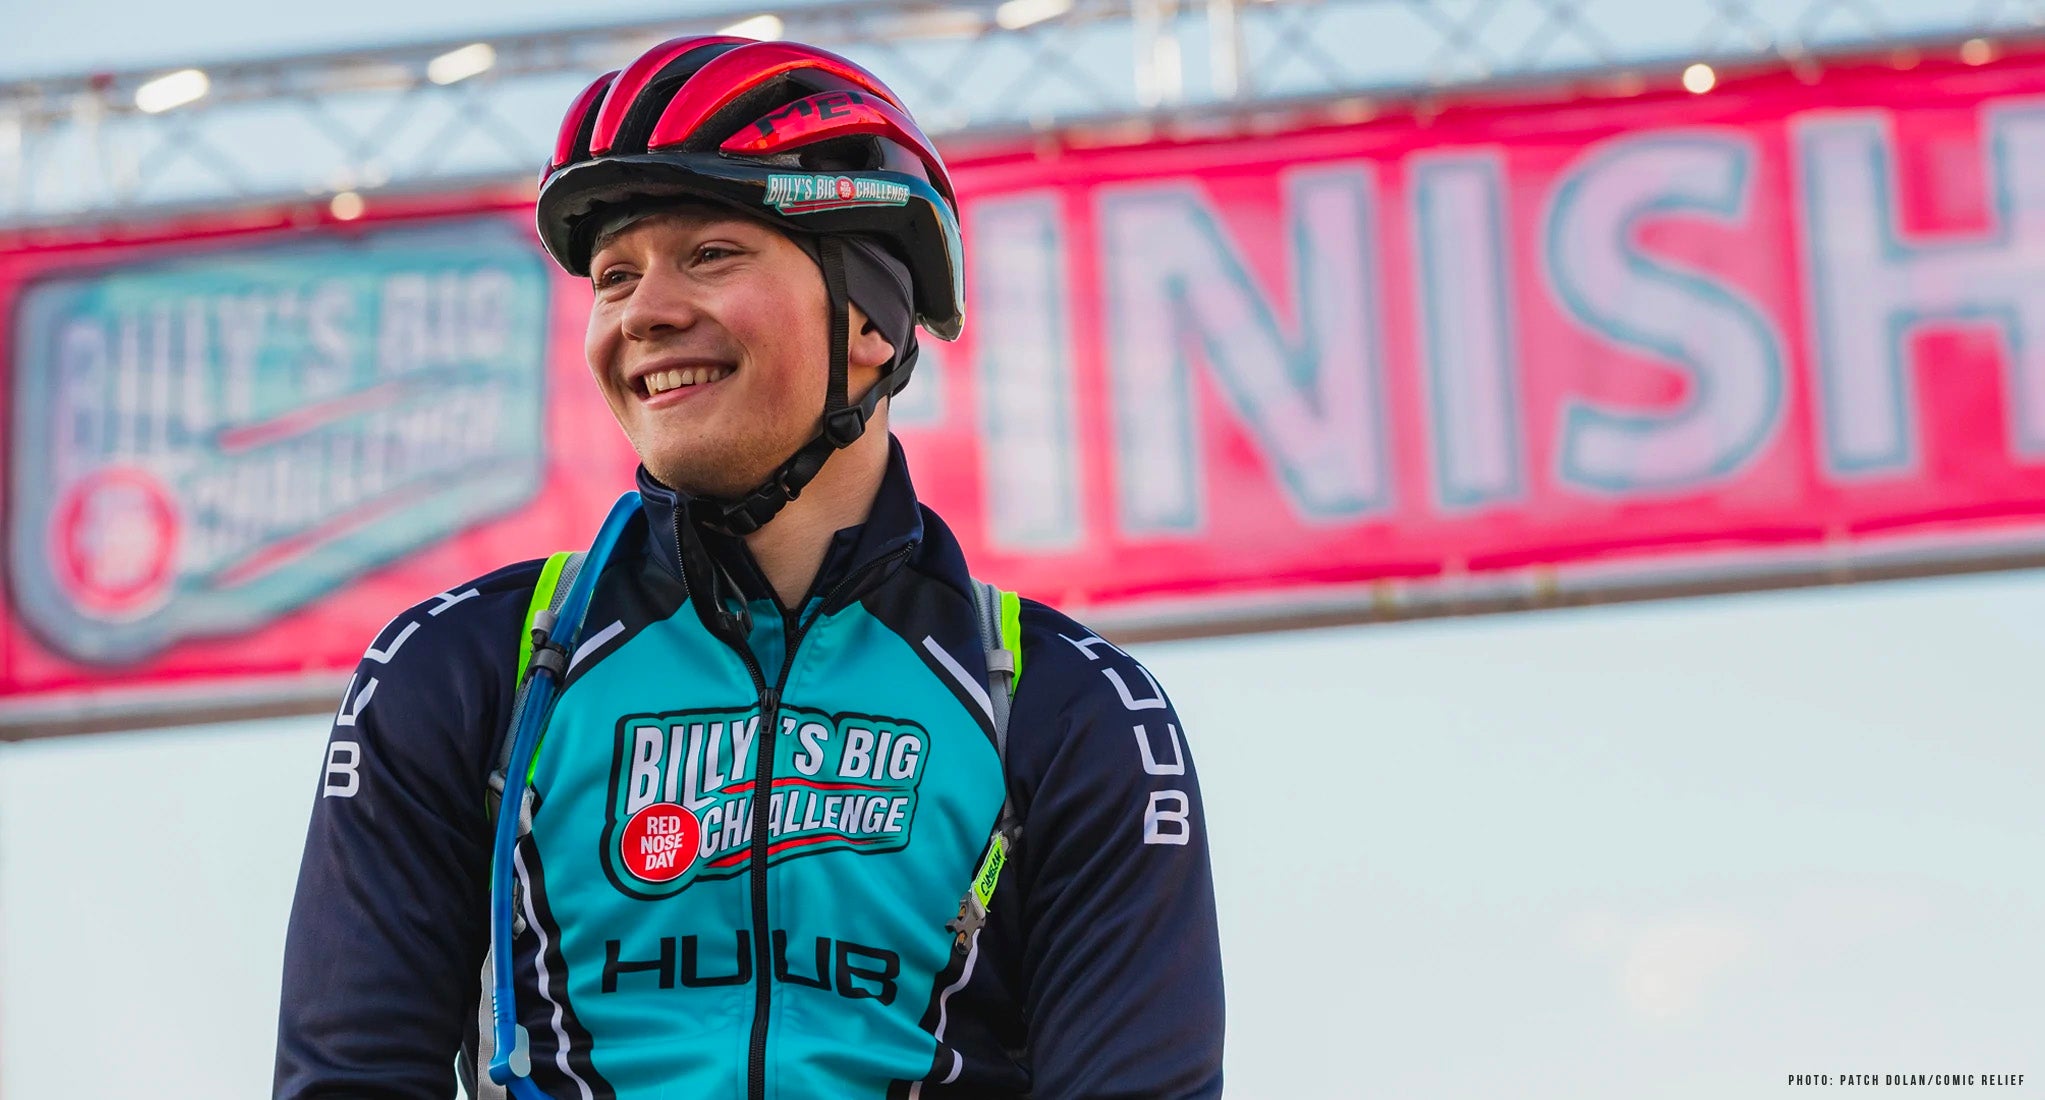 Billy Monger completes Billy's Big Red Nose Day Challenge